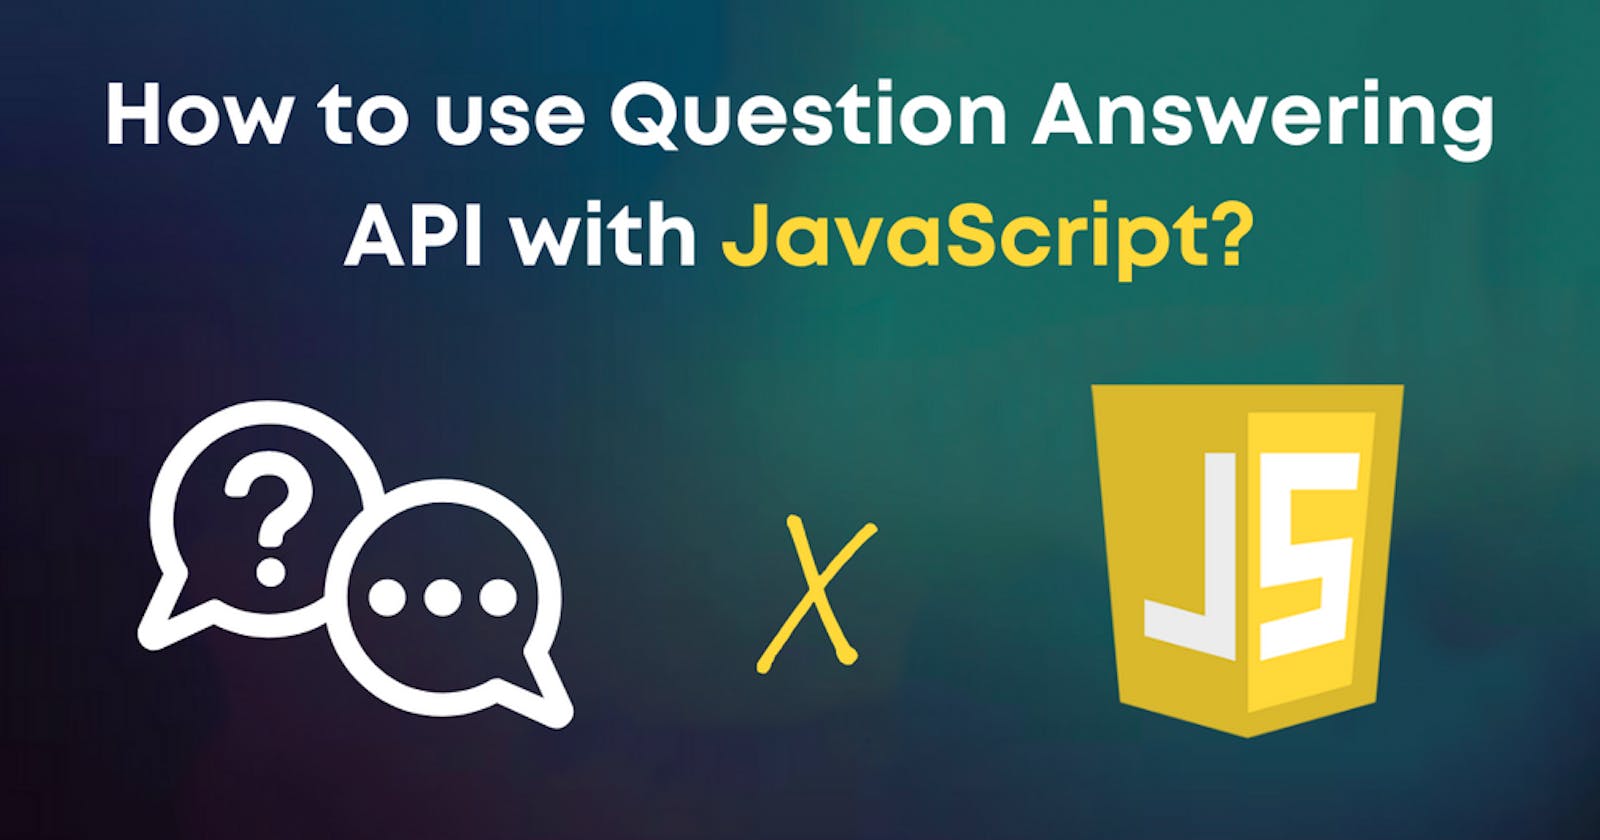 How to use Question Answering API with JavaScript in 5 minutes?